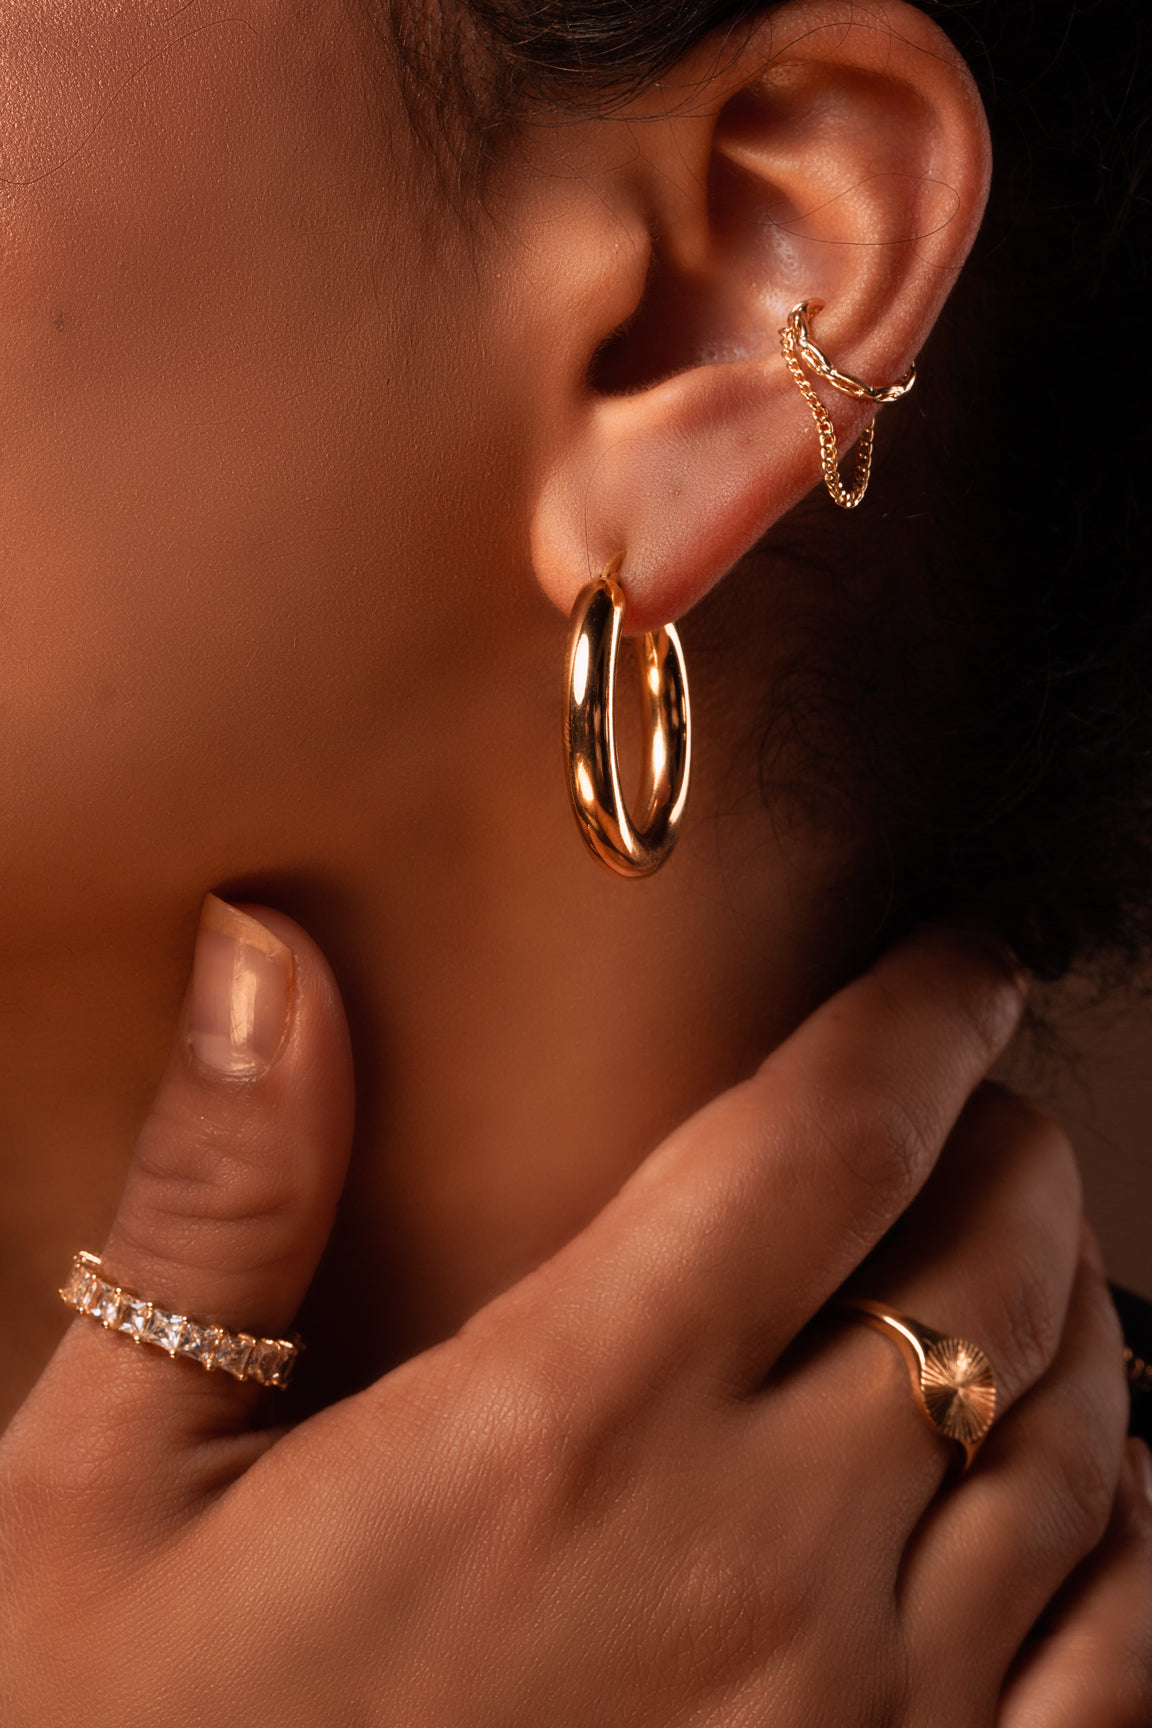 Woman flaunting her elegant style wearing Classic Gold Hoop Earrings, 18K gold-plated and hypoallergenic, perfect for a chic fashion statement. B-Xquisite Jewelry Earrings